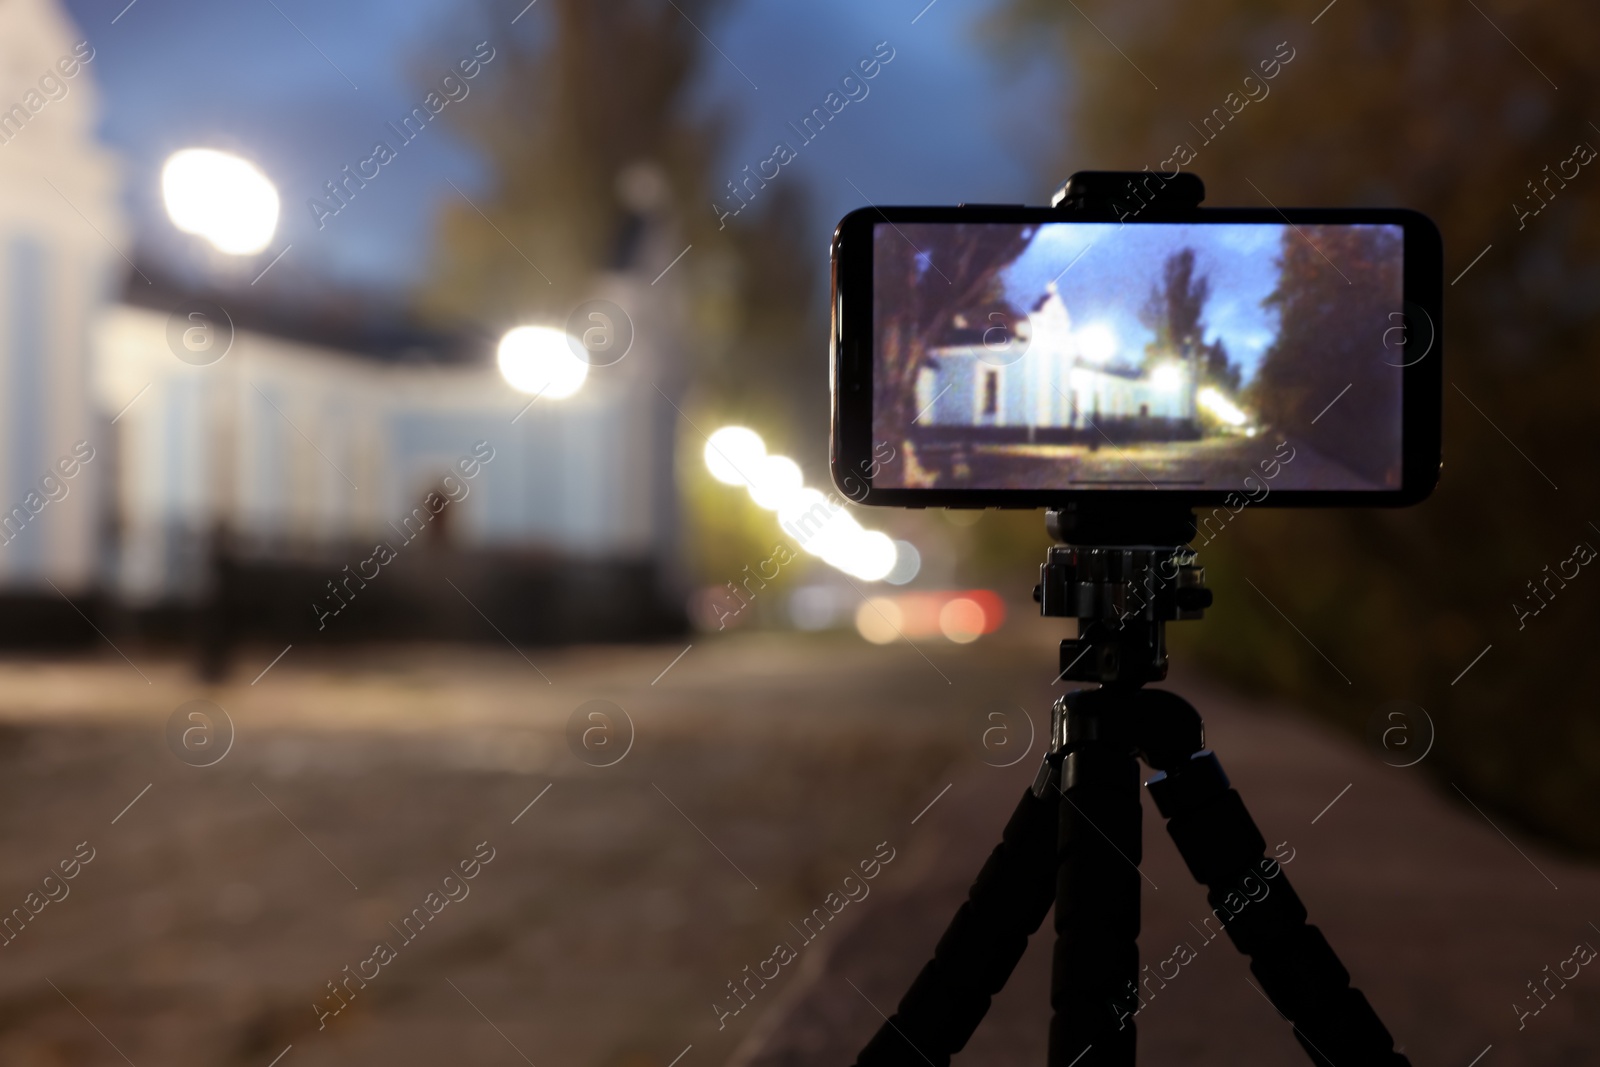 Photo of Taking photo with smartphone on tripod outdoors at night